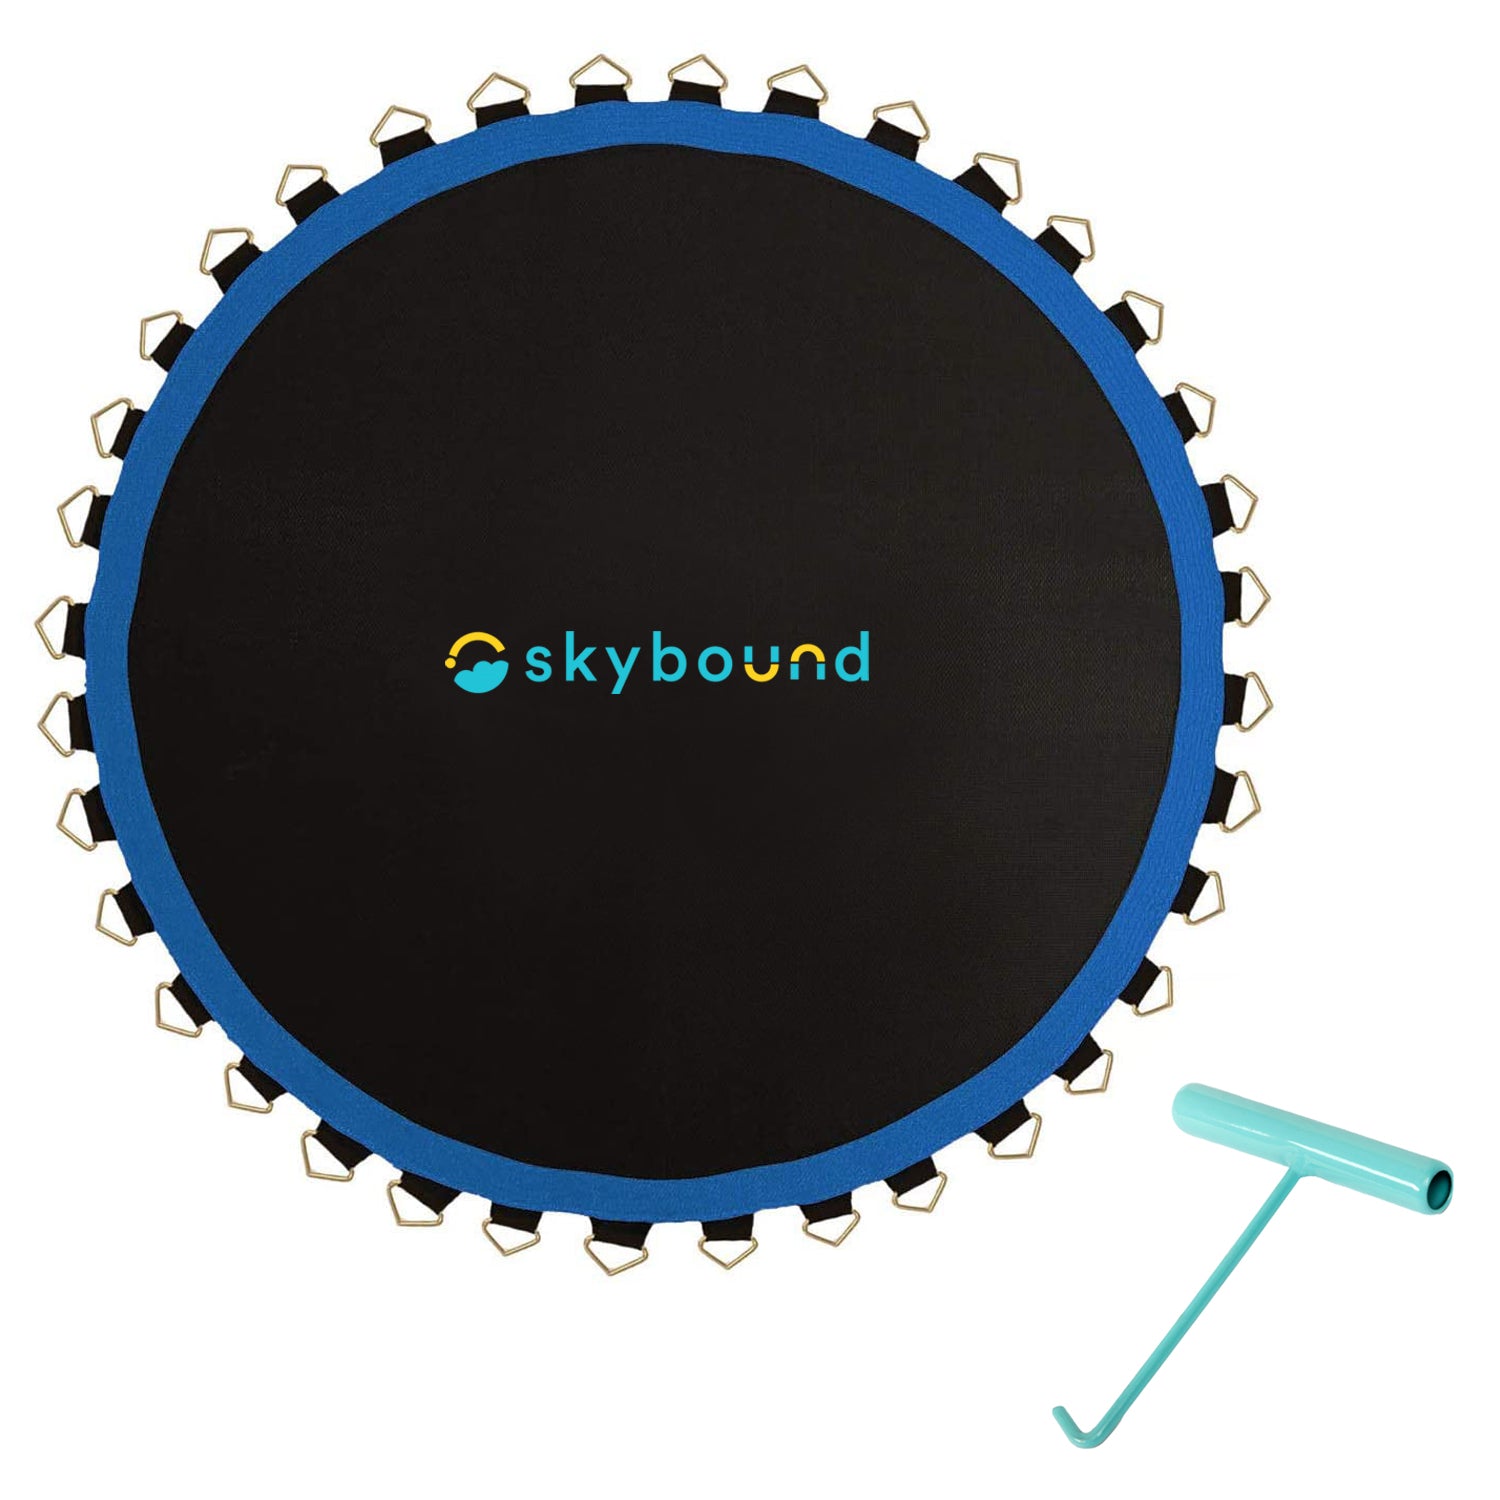 Premium Replacement Mat for 14ft Trampolines - 150in / 72 V-Rings / 5.5in Springs - 4 Colors Available